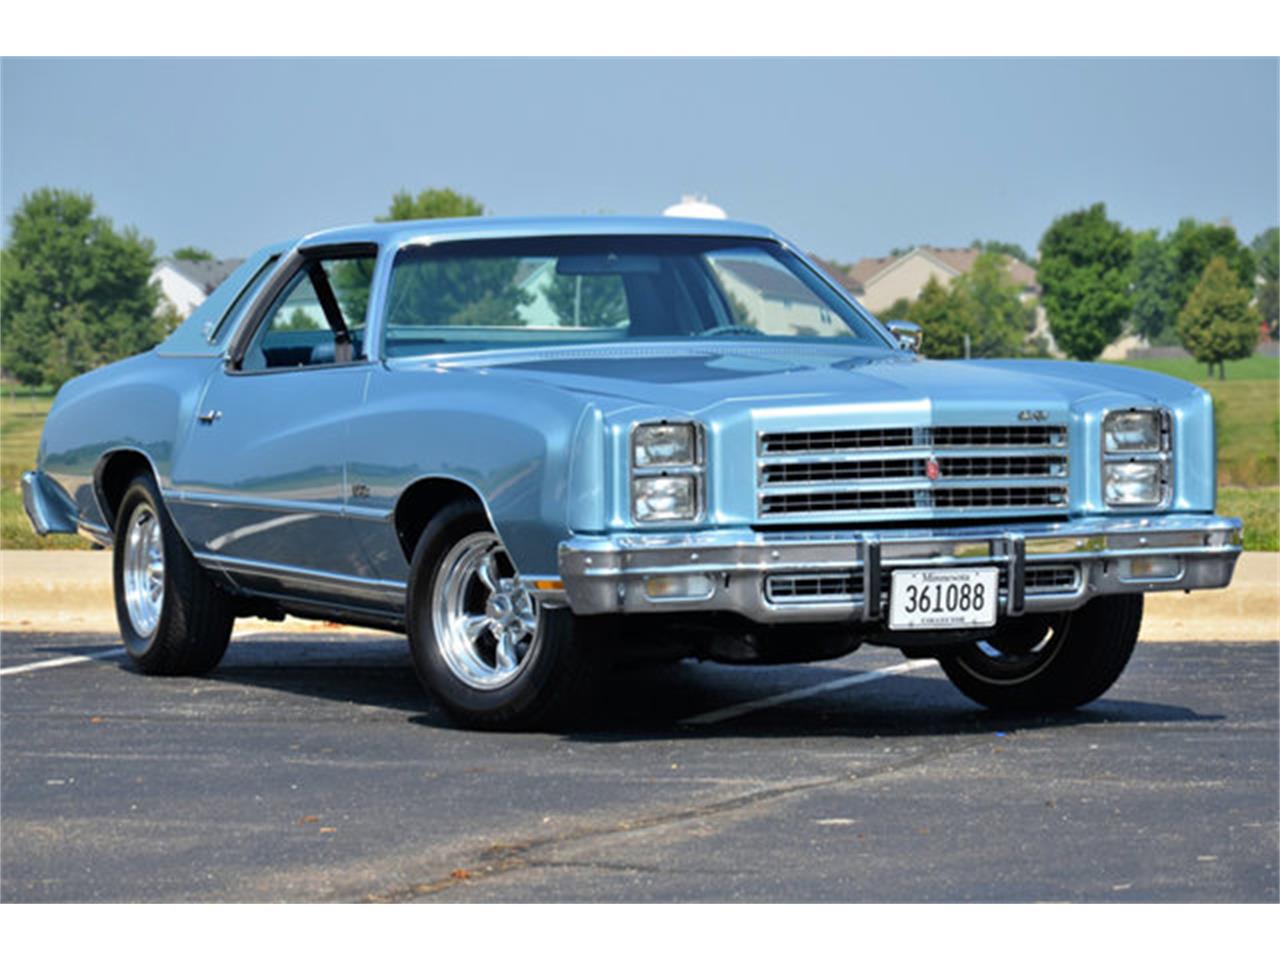 1976 CHEVROLET MONTE CARLO//SS OWNER/'S MANUAL